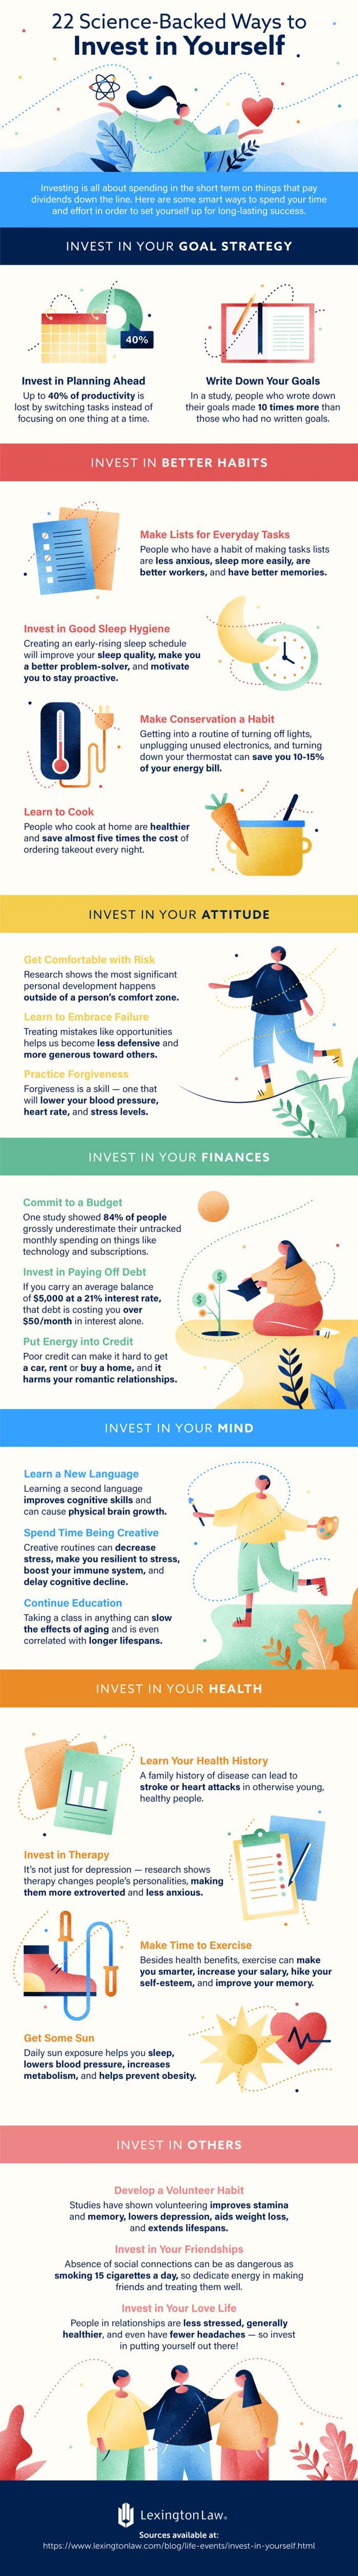 22 Science-Backed Ways to Invest in Yourself #infographic